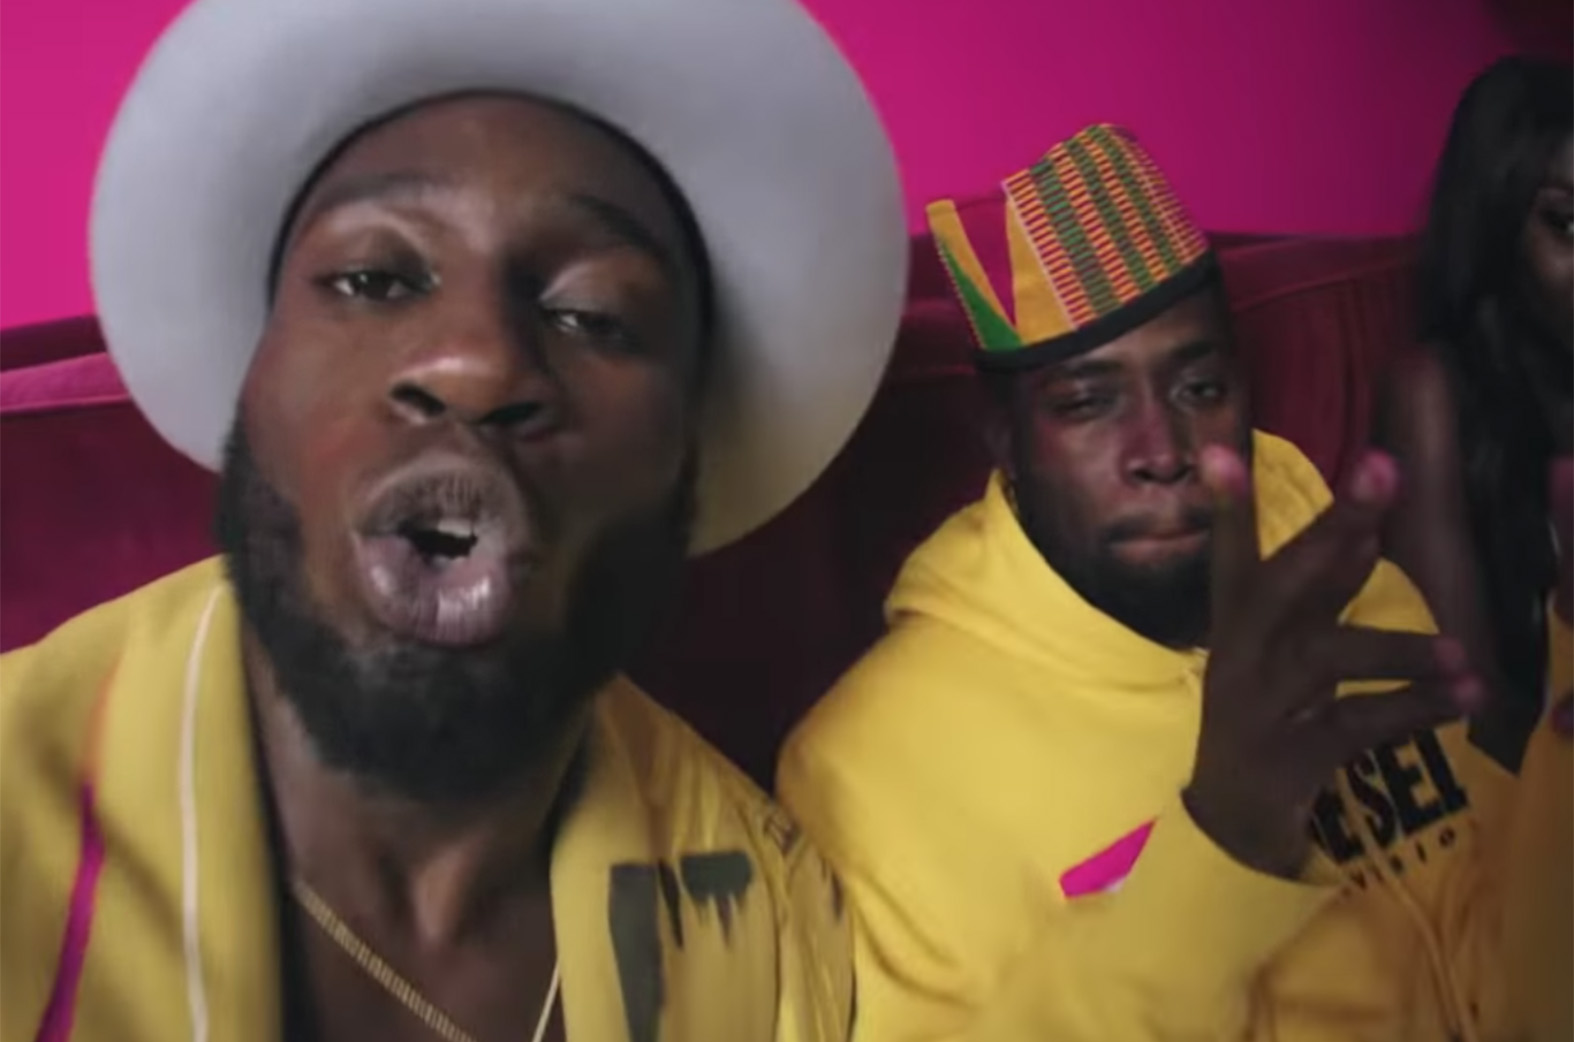 Video: Normal by Juls feat. Kojey Radical